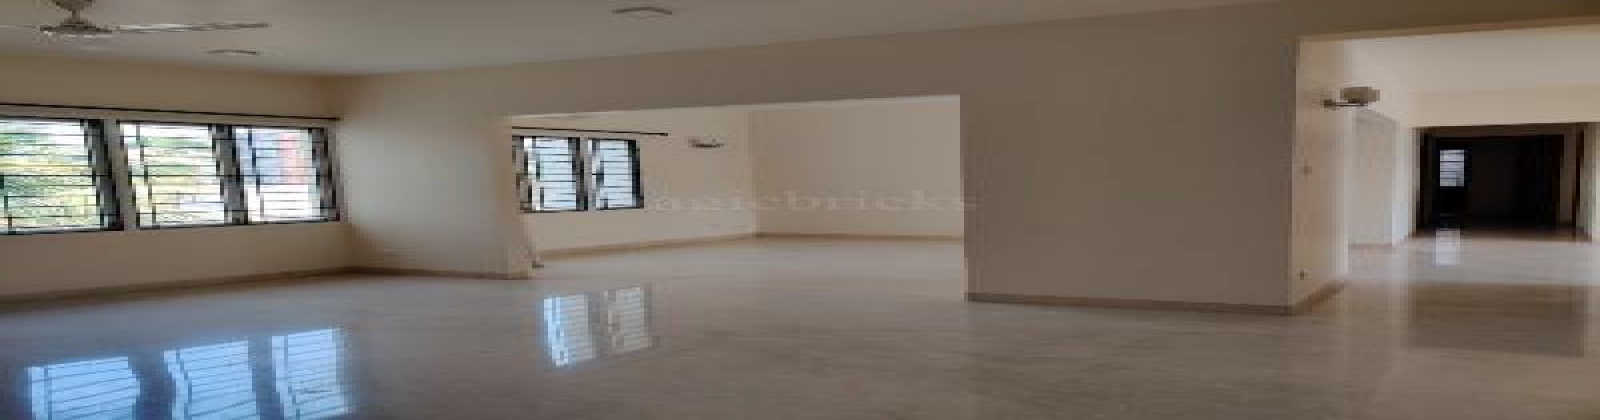 Cp Ramaswamy, Chennai - Central, 600004, 3 Bedrooms Bedrooms, ,4 BathroomsBathrooms,Apartment,Rent-Residential, Cp Ramaswamy,6,1029